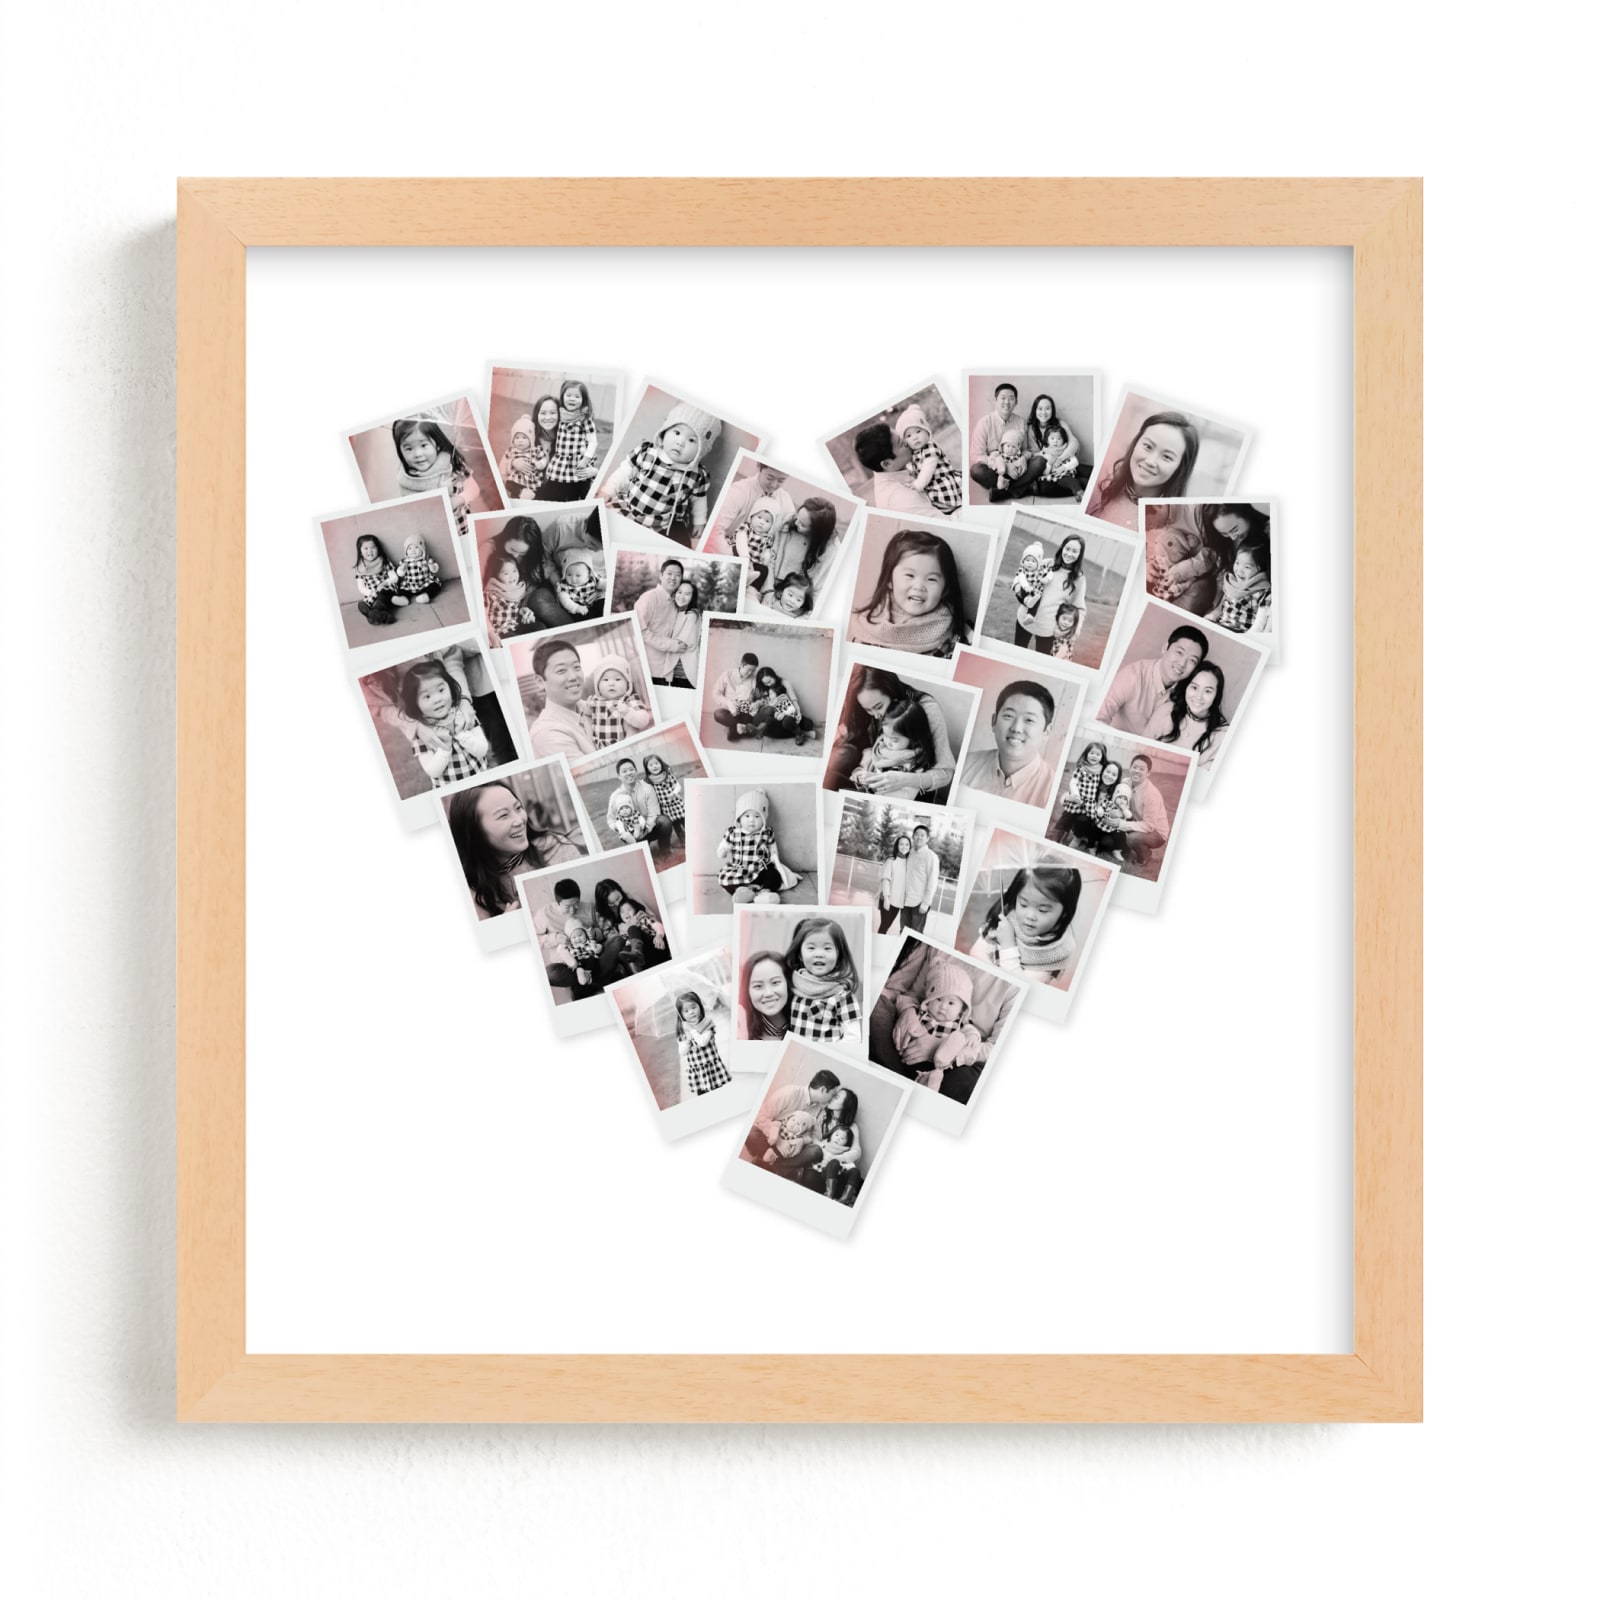 This is a pink photo art by Minted called Filter Heart Snapshot Mix® Photo Art.